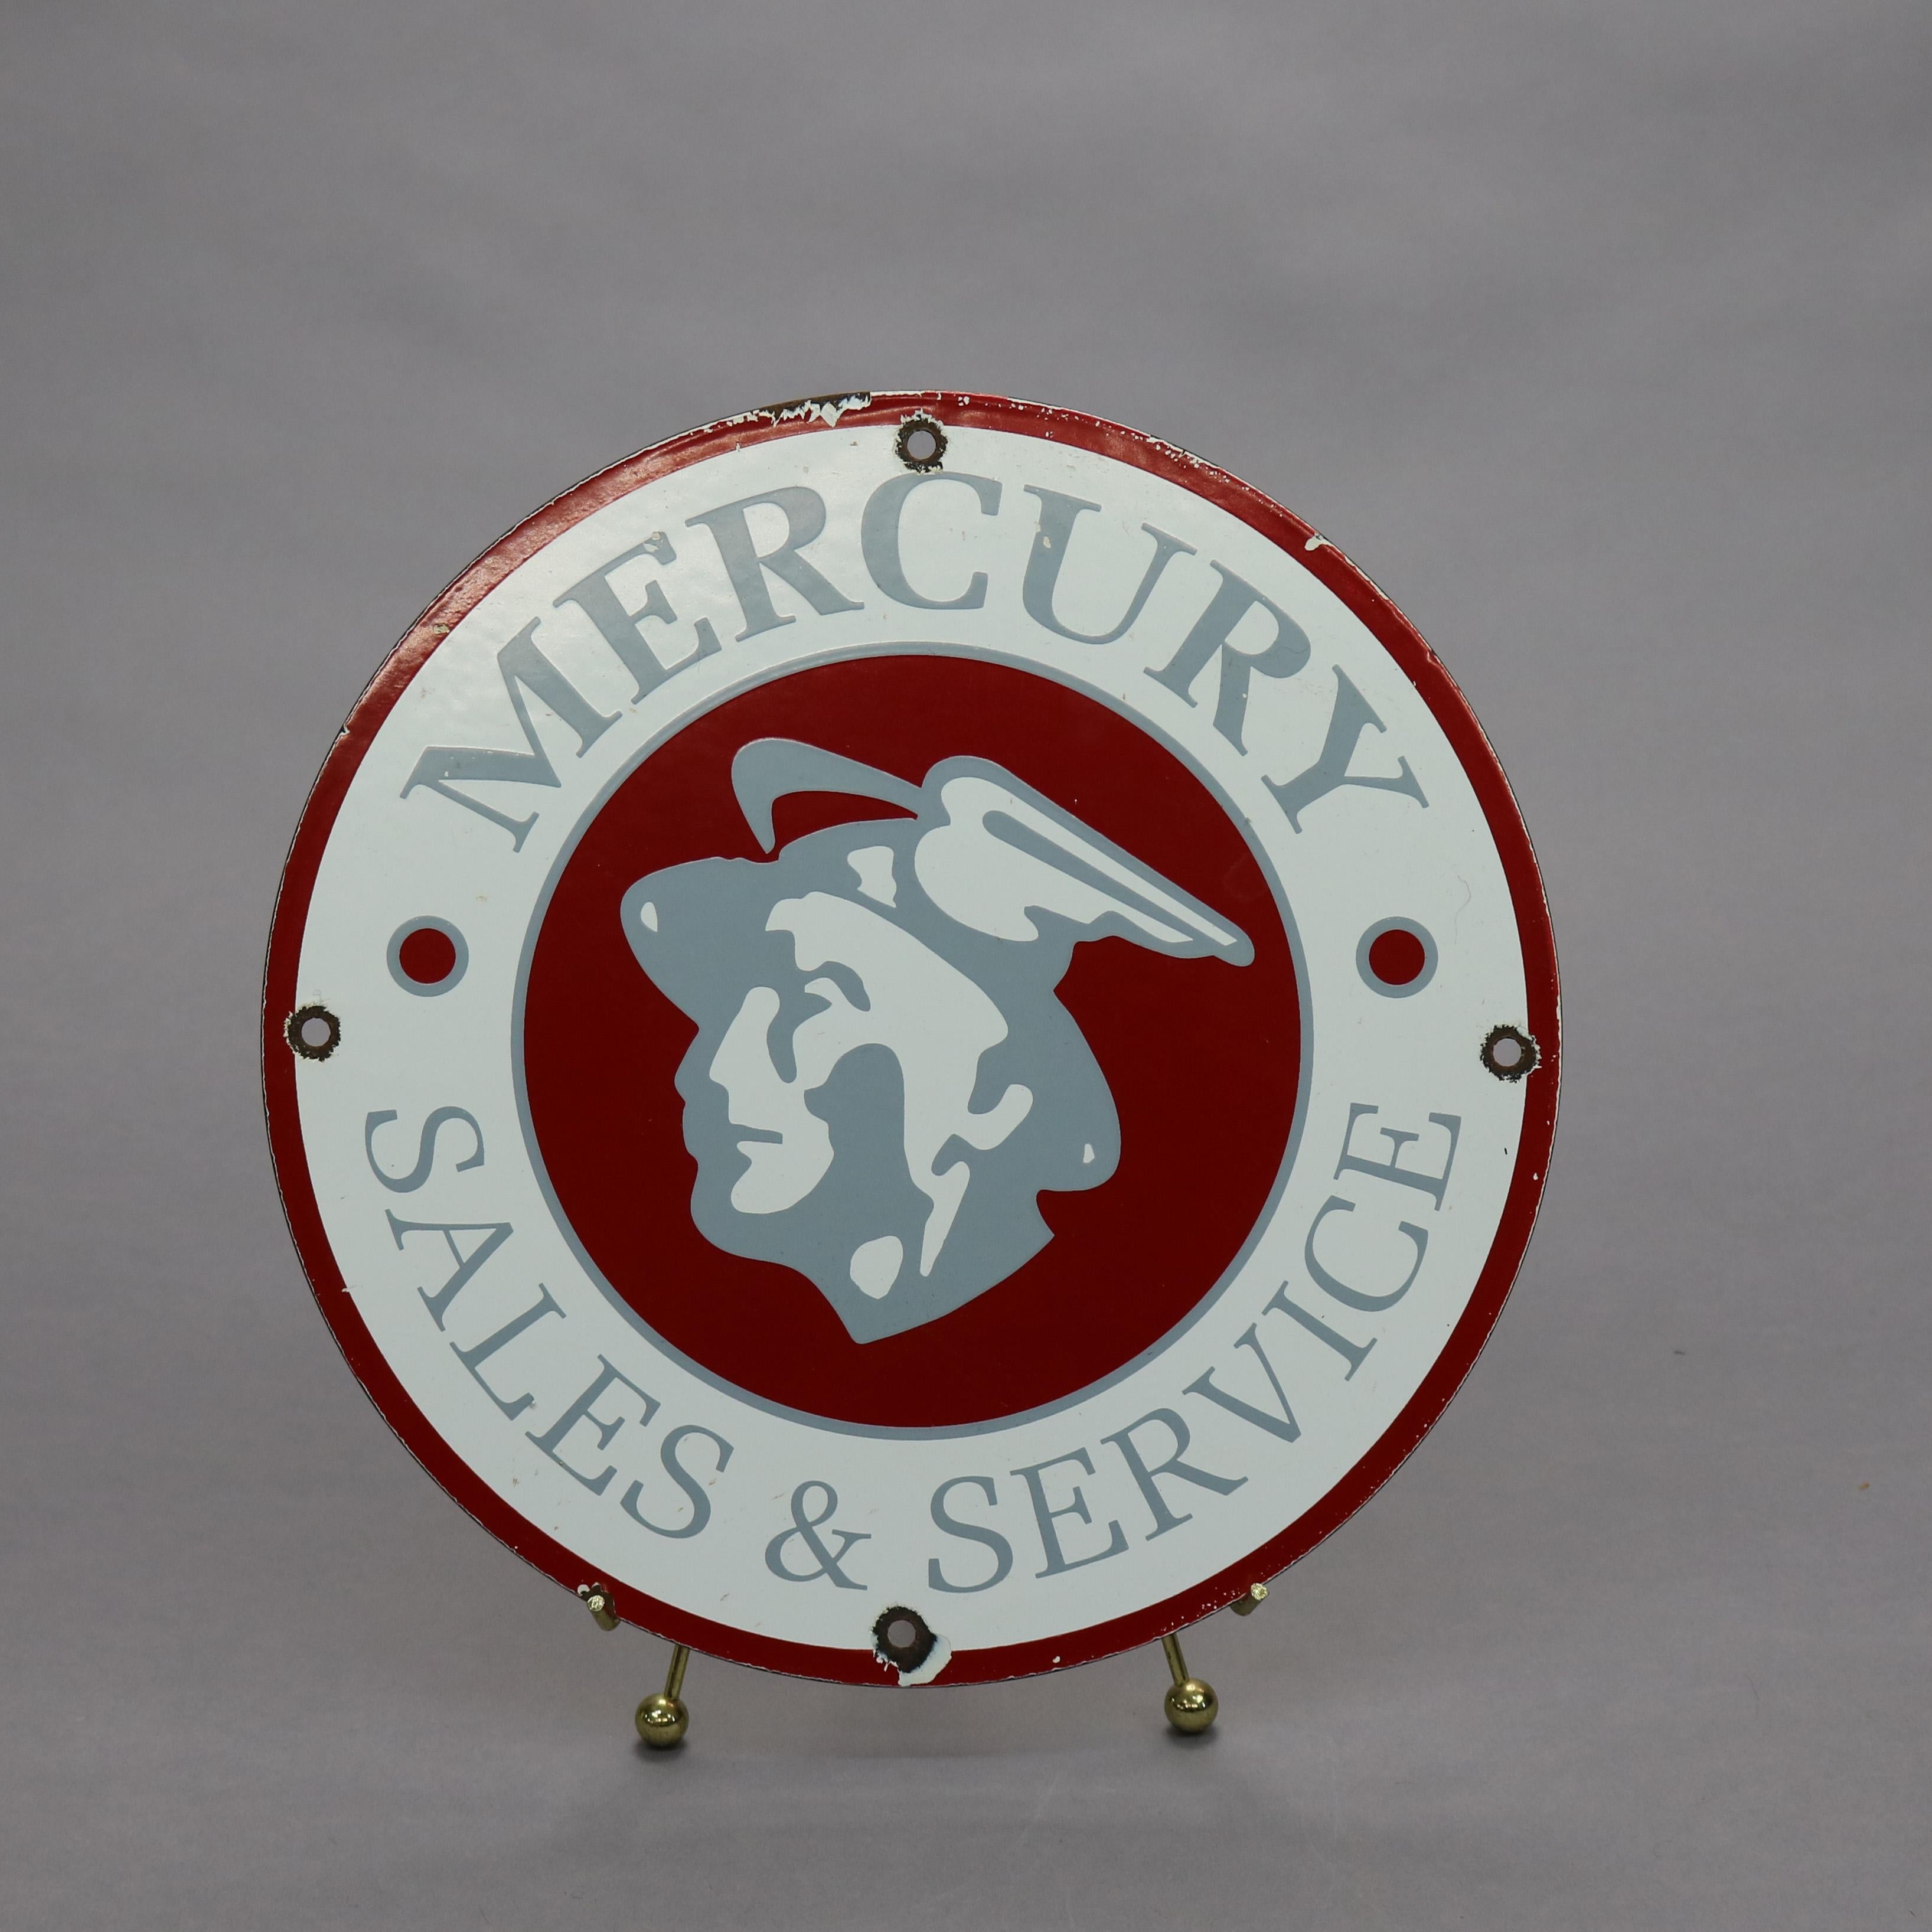 A vintage Mercury Sales and Service automotive (automobile, car) advertising sign offers round metal form with porcelain enameled logo having central iconic Roman god with his winged hat with wording surround, c1930

Measures - 11.75